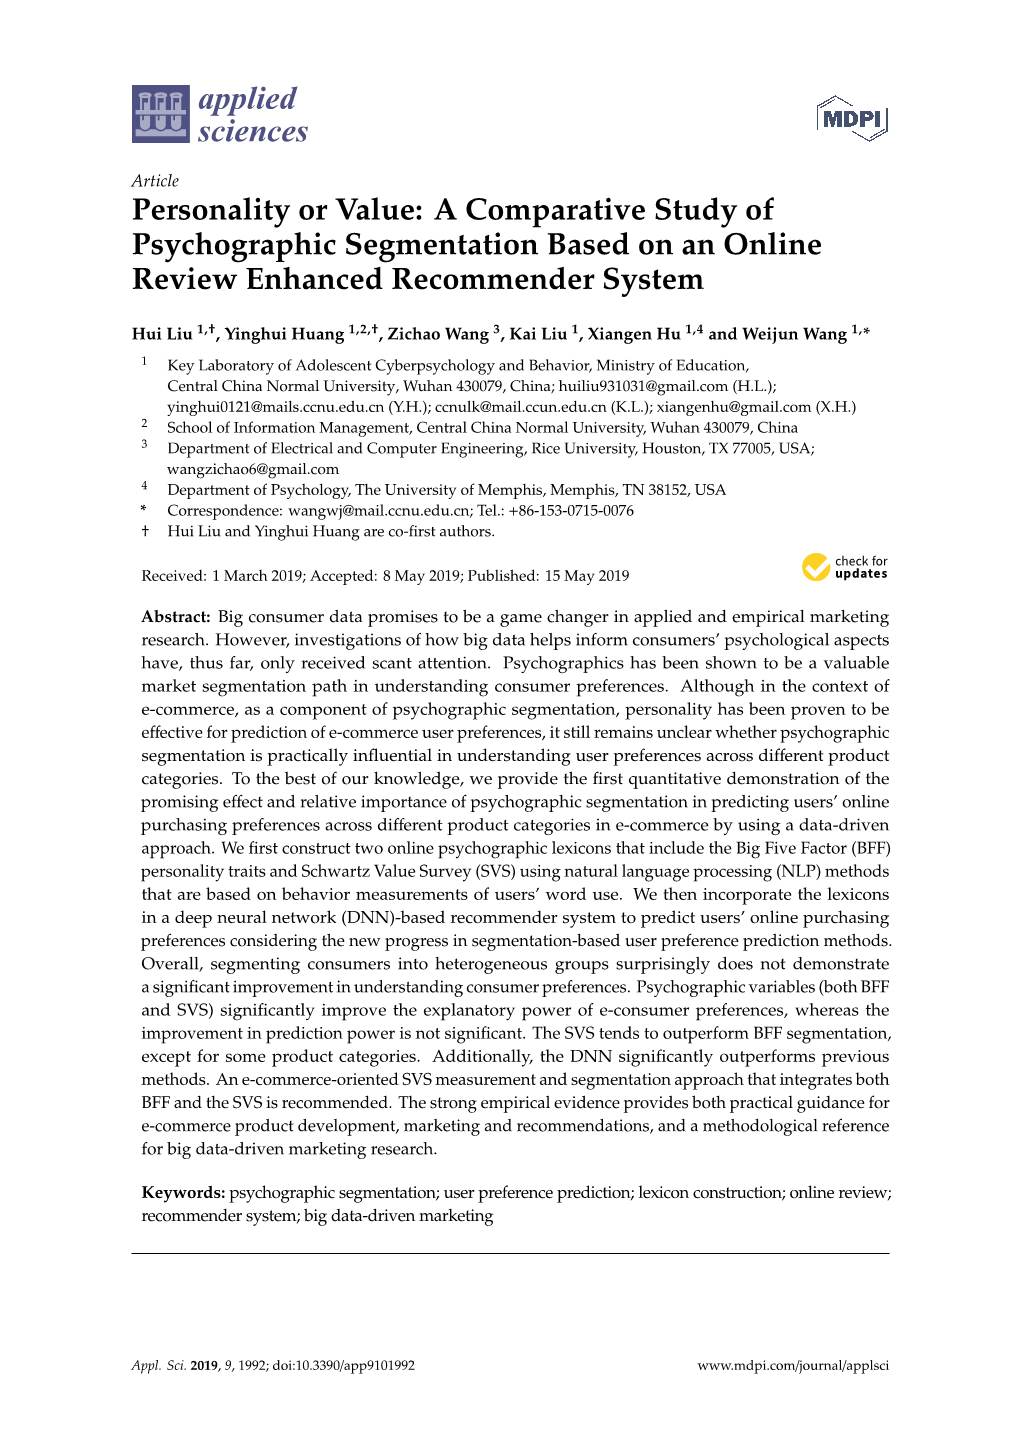 Personality Or Value: a Comparative Study of Psychographic Segmentation Based on an Online Review Enhanced Recommender System